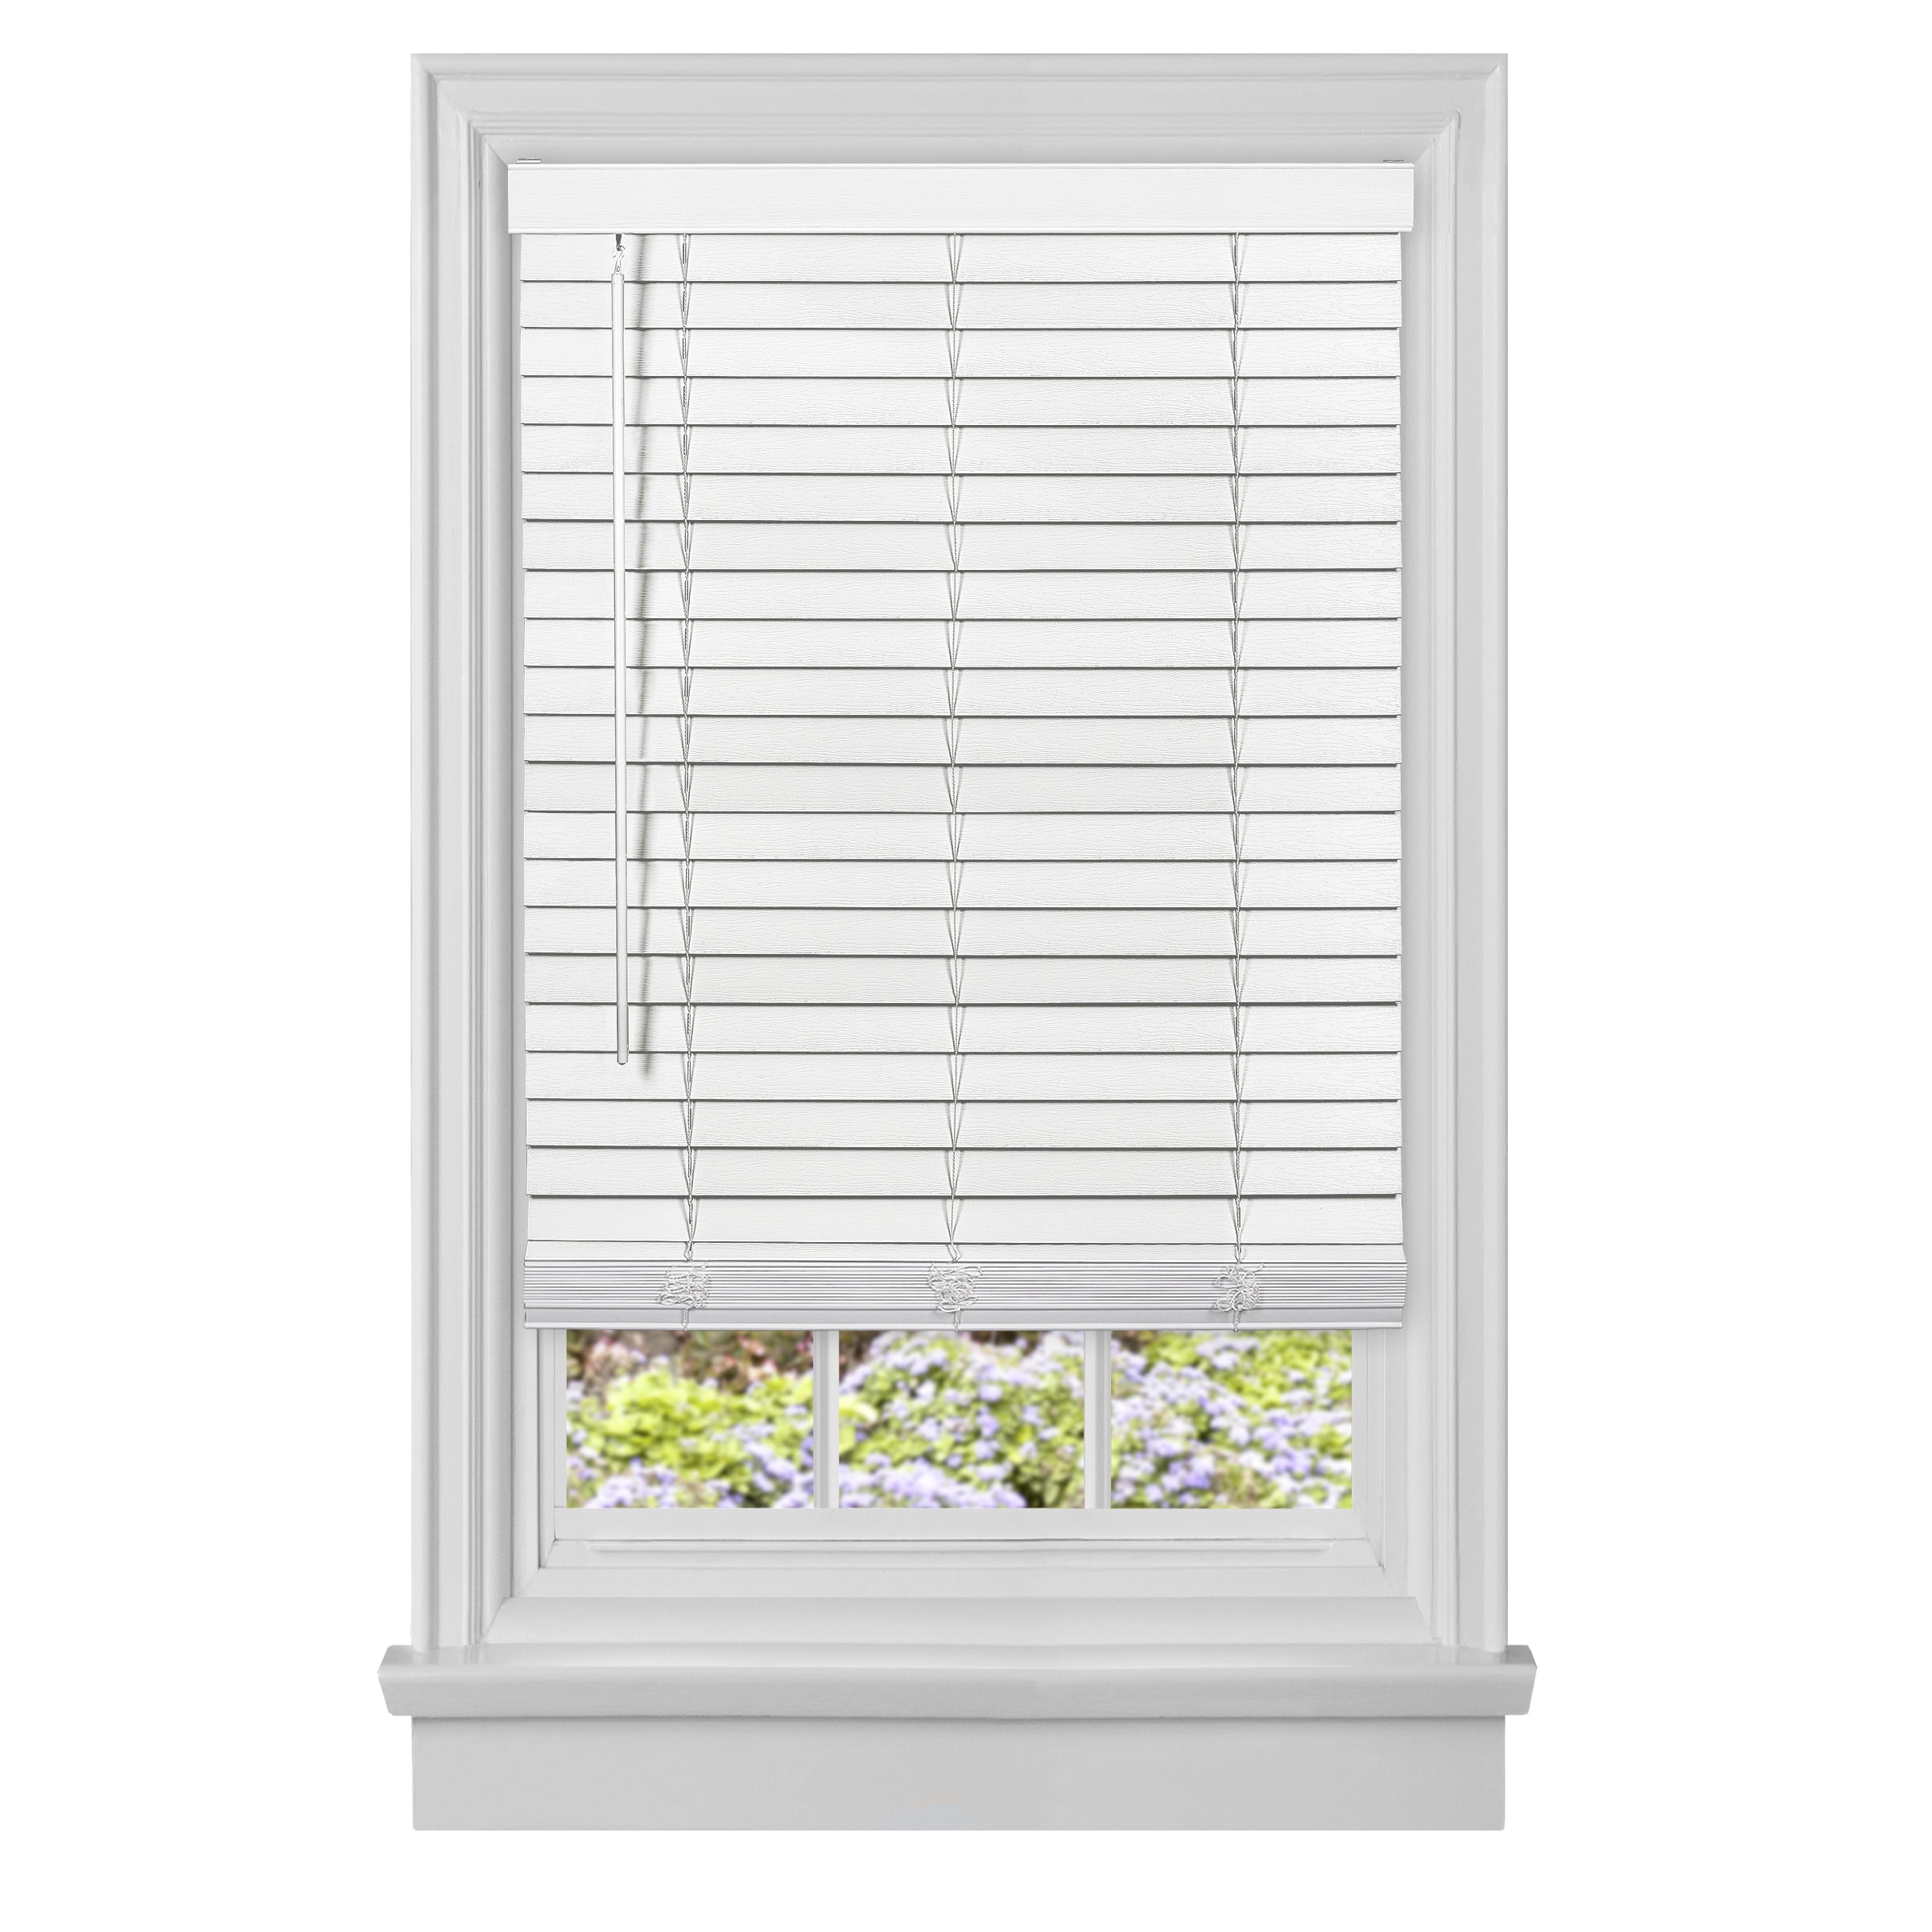 Picture of Achim MFG243WH02 43 x 64 in. Cordless GII Madera Falsa 2 in. Faux Wood Plantation Blind - White